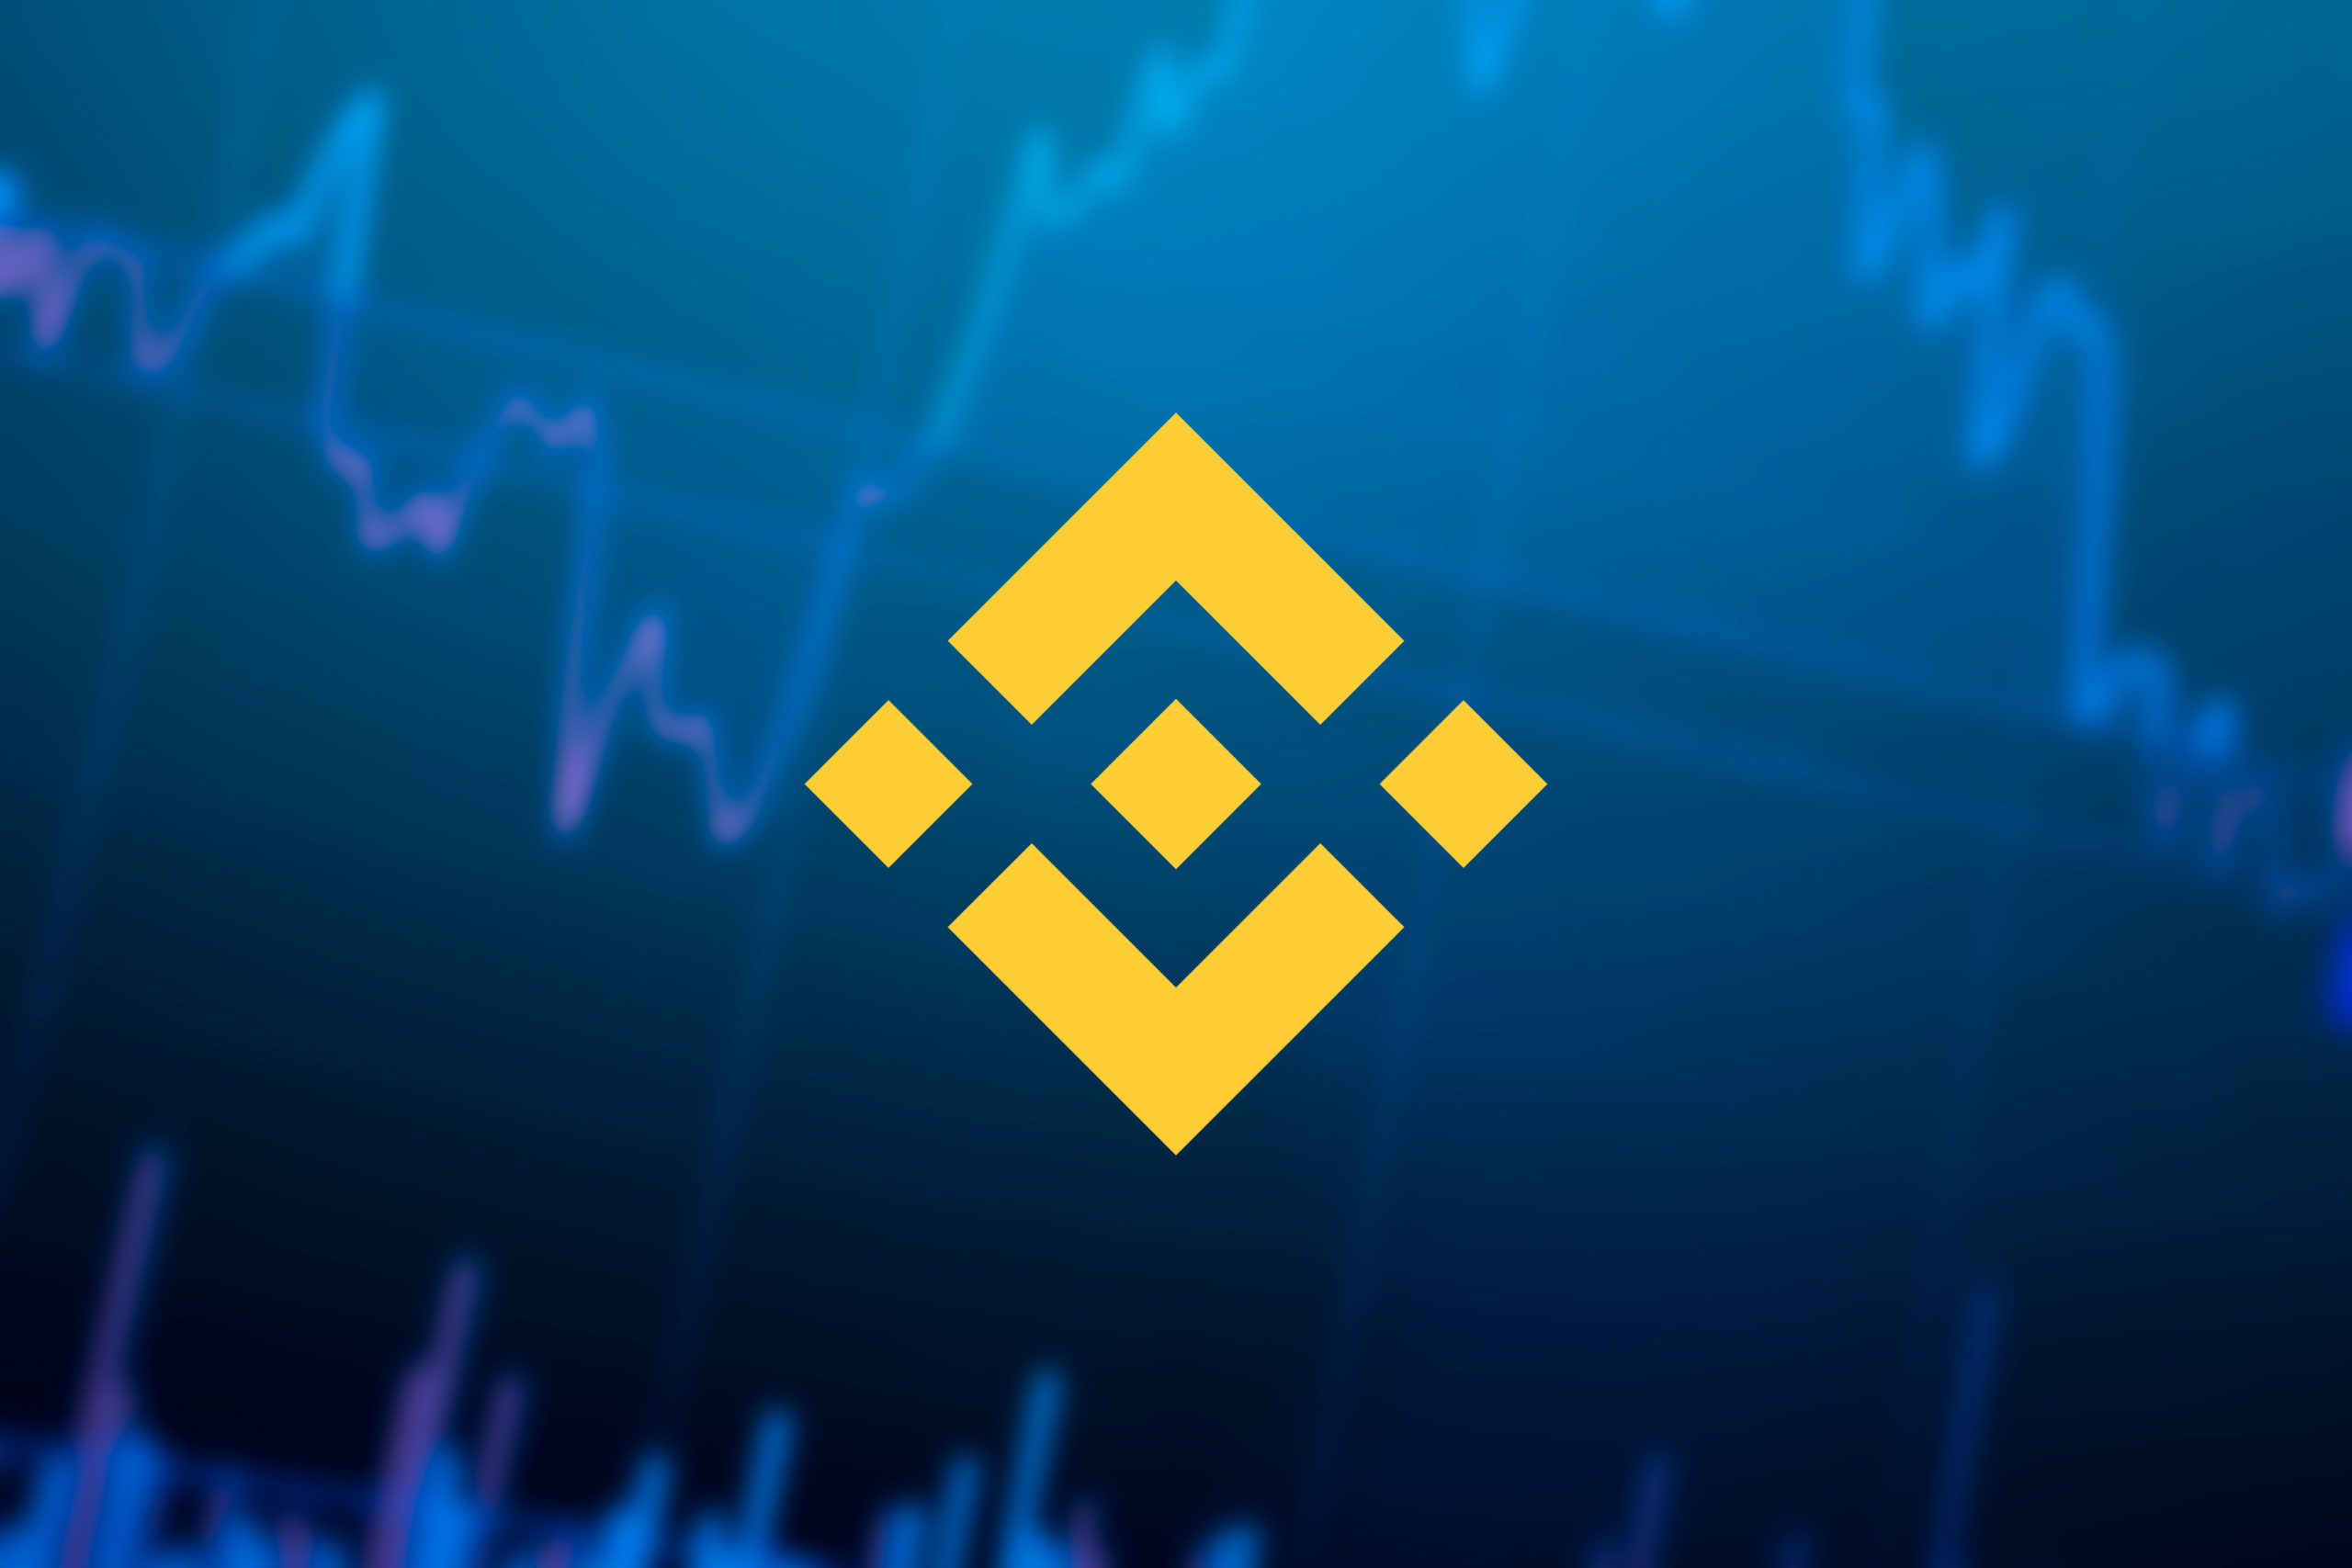 binance coin cryptocurrency bnb coin growth chart exchange chart